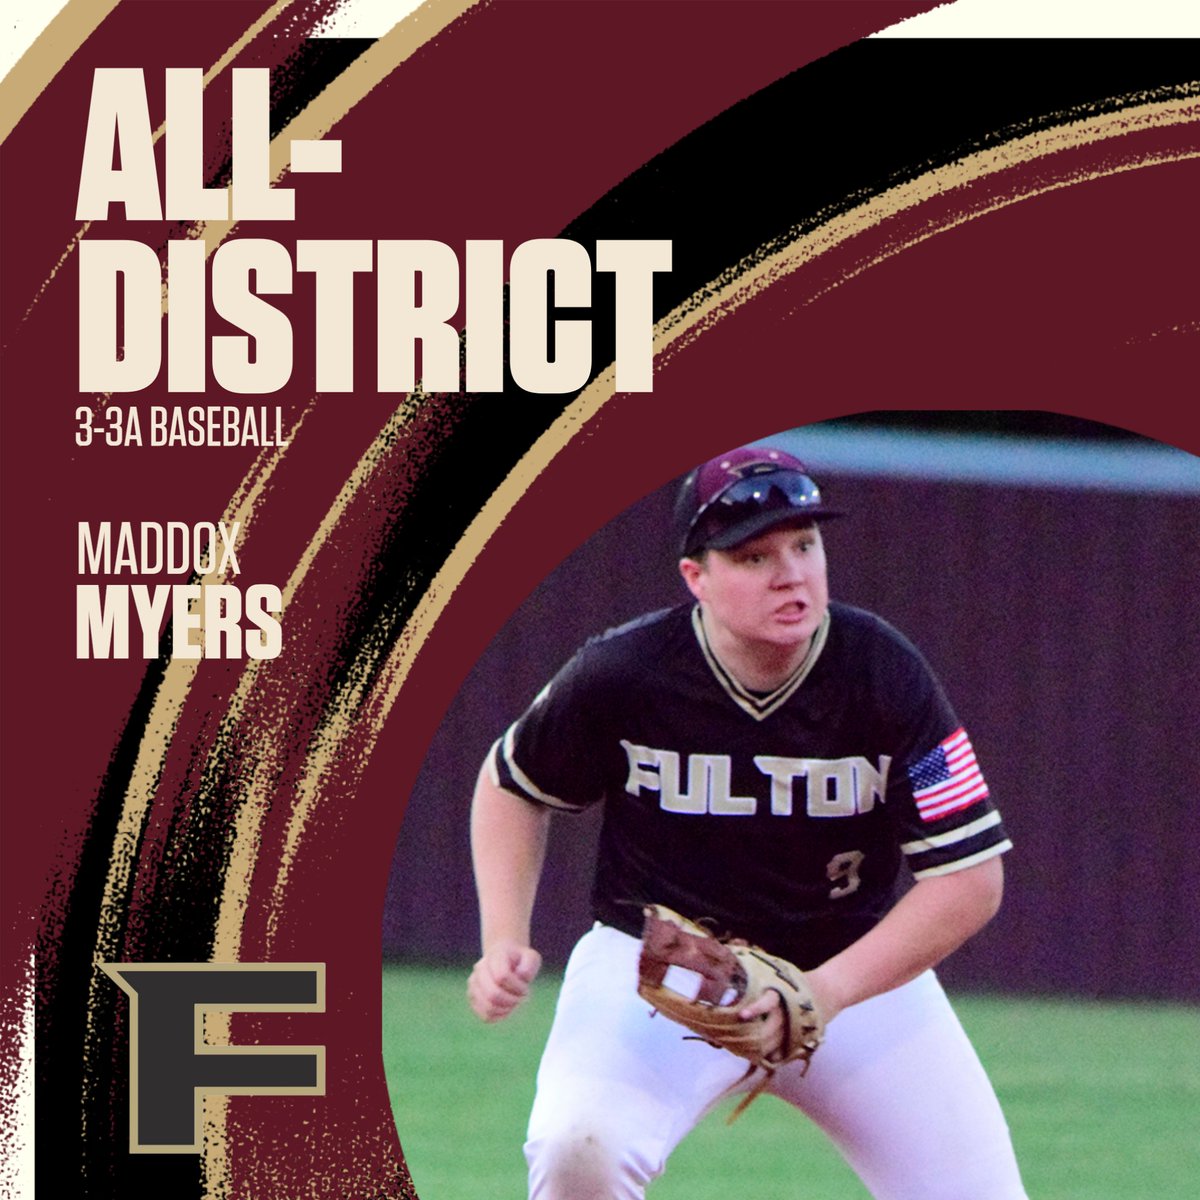 Congratulations to junior P/C/SS/3B Maddox Myers for earning a spot on the All-District 3-3A team!